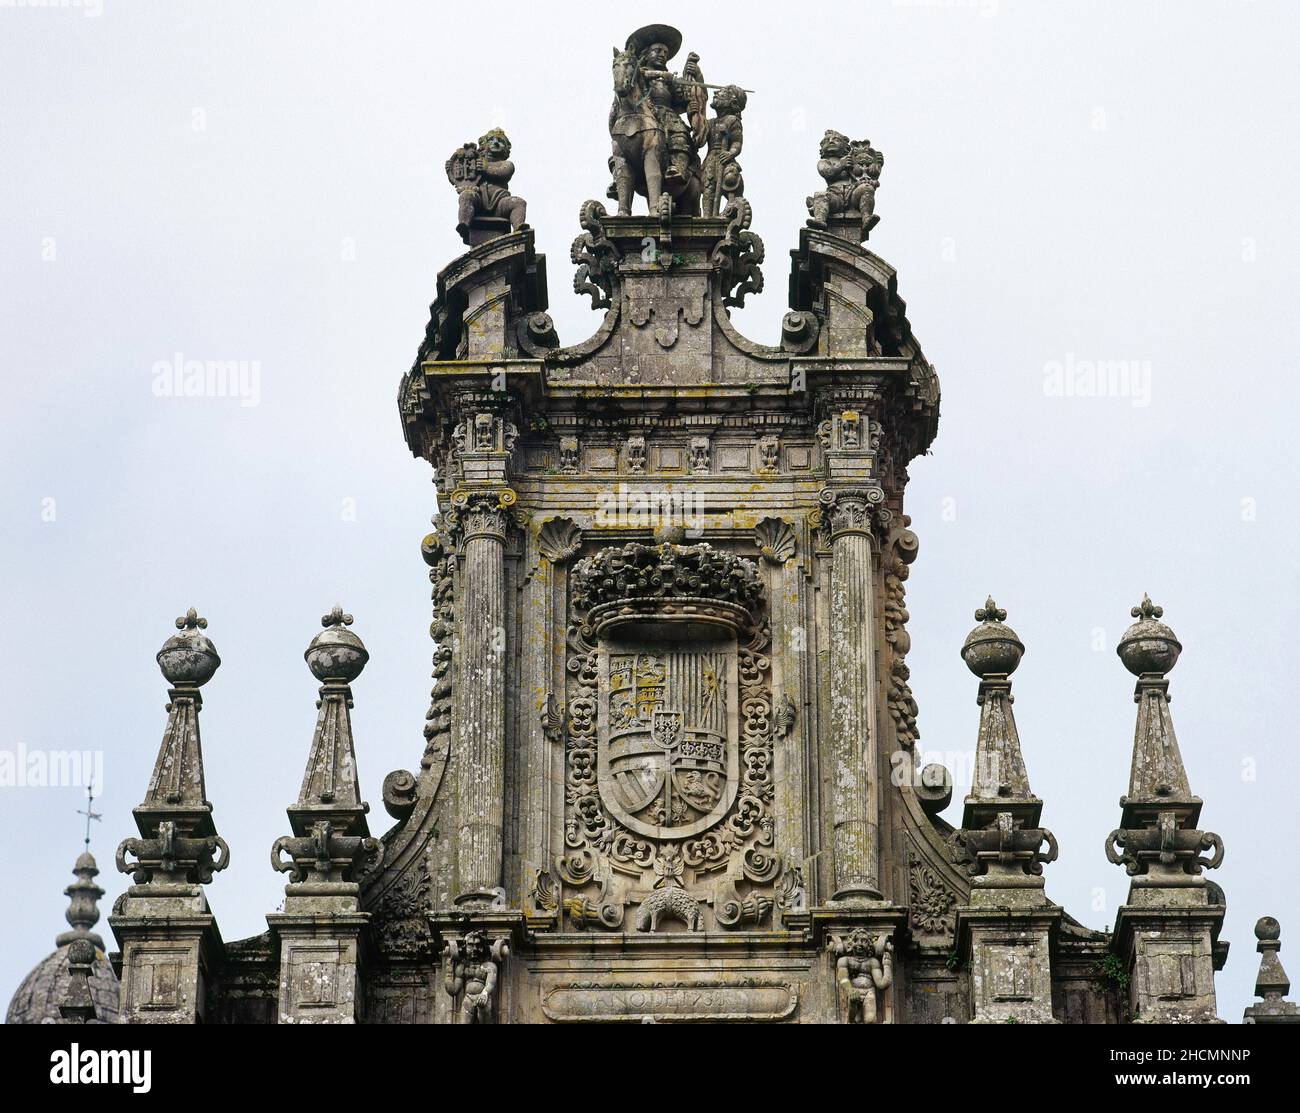 Spain, Galicia, A Coruña province, Santiago de Compostela. San Martin Pinario Monastery. Architectural detail of the structure added in 1738 by Fernando de Casas Nóvoa (ca.1700-1749), to complete the façade, with the arms of Spain between scallops, and the equestrian image of Saint Martin of Tours sharing his cloak with a beggar who represents to Christ. Stock Photo